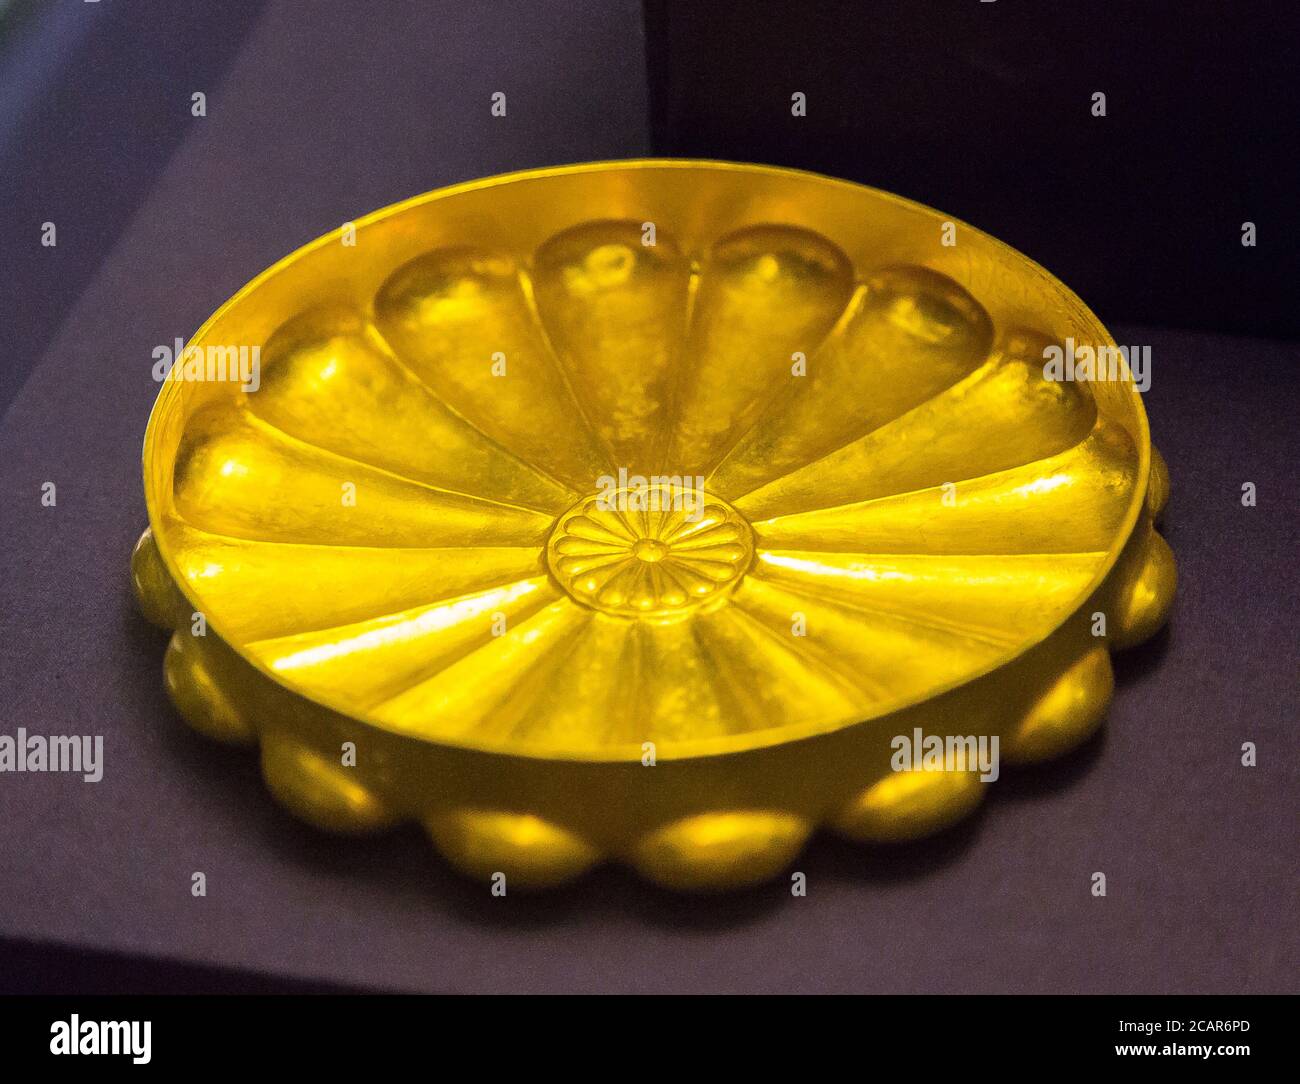 Cairo, Egyptian Museum, dishes found in Tanis, burial of Psusennes : Gold cup in the shape of a flower with 16 petals and a center with a rosette. Stock Photo